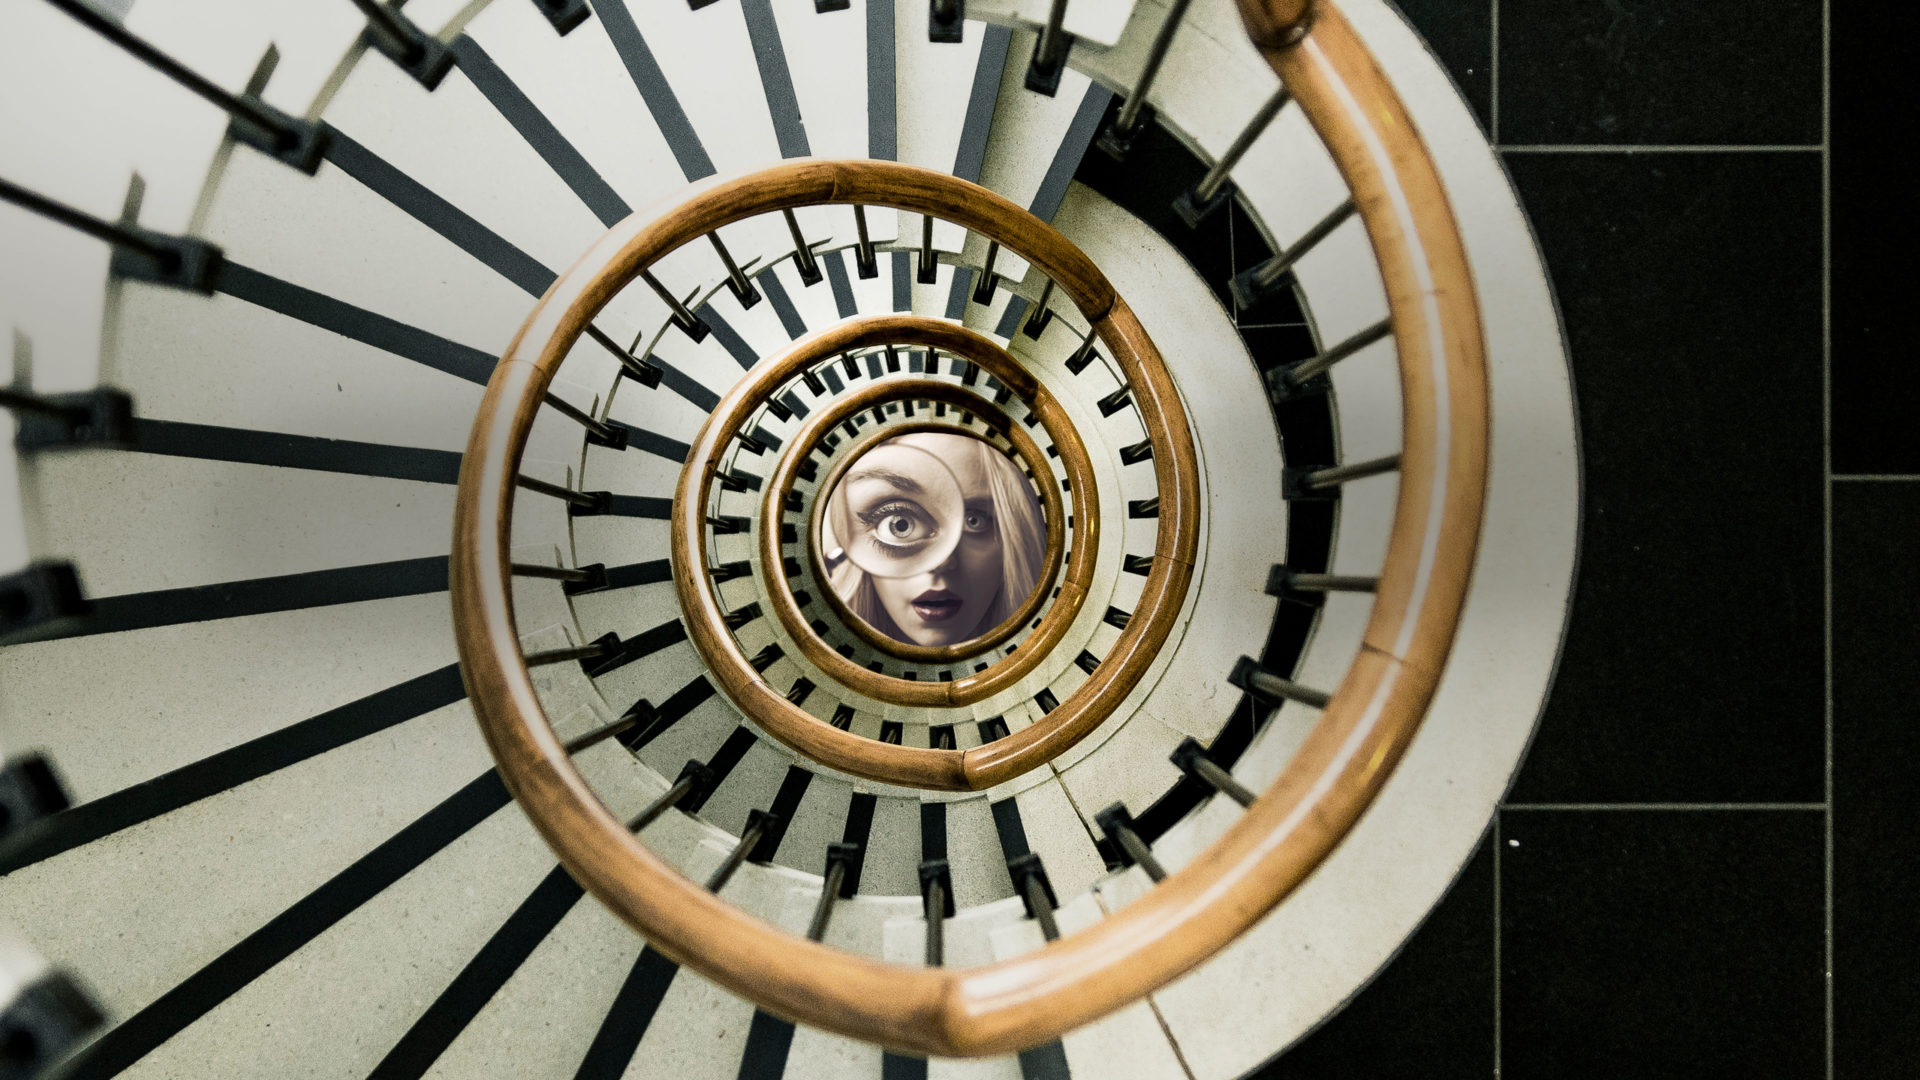 A film poster depicting a spiral staircase. In the middle of the spiral is a young woman holding up a magnifying glass.